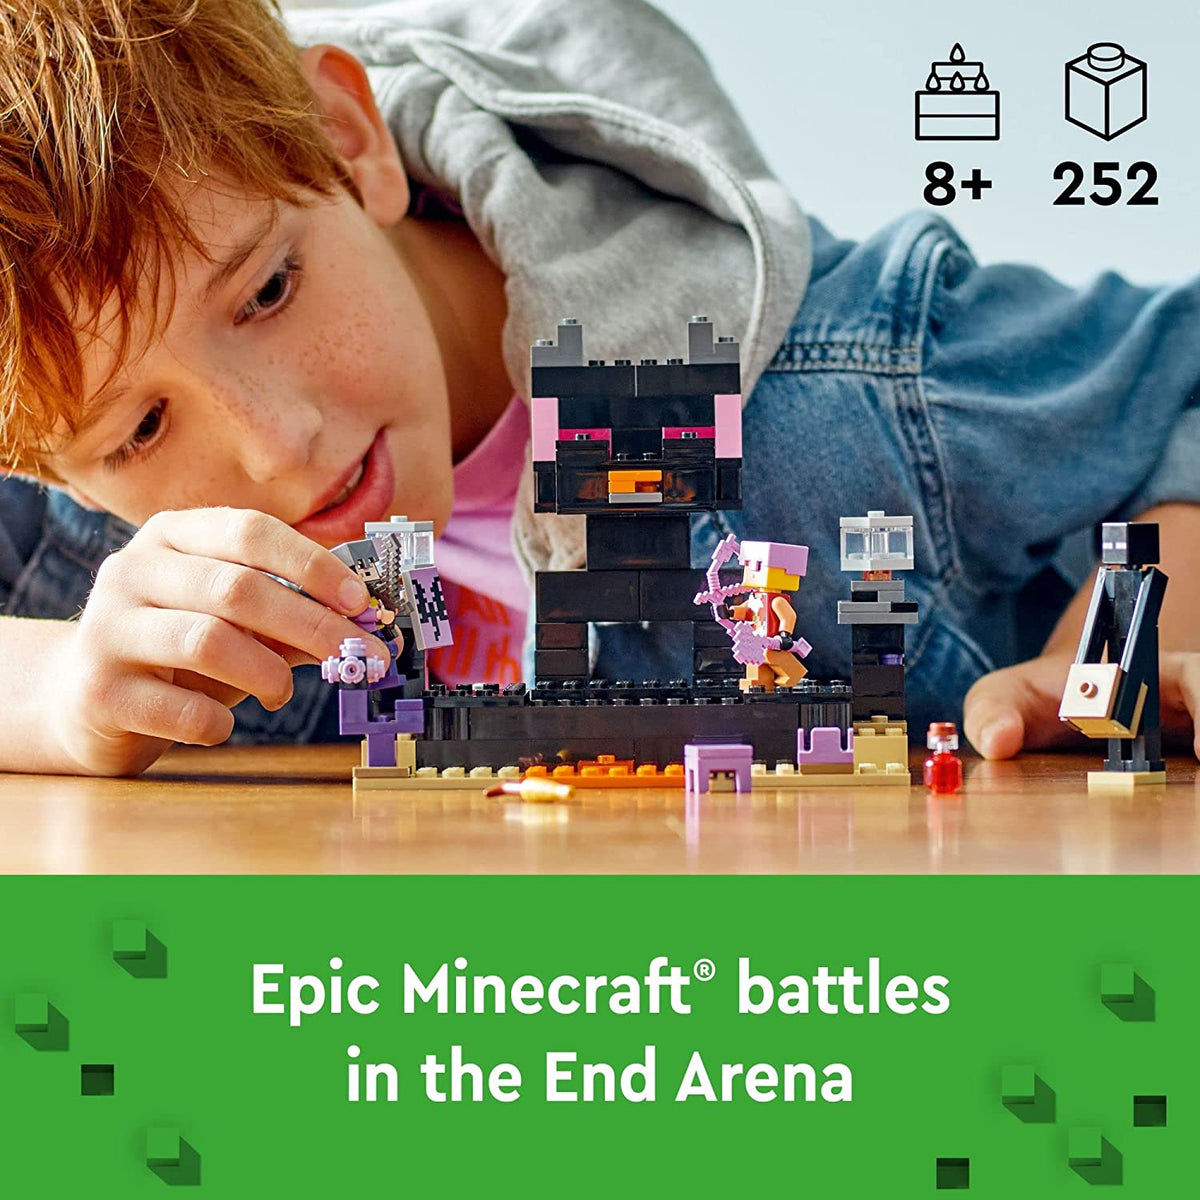 MINECRAFT 21242: The End Arena